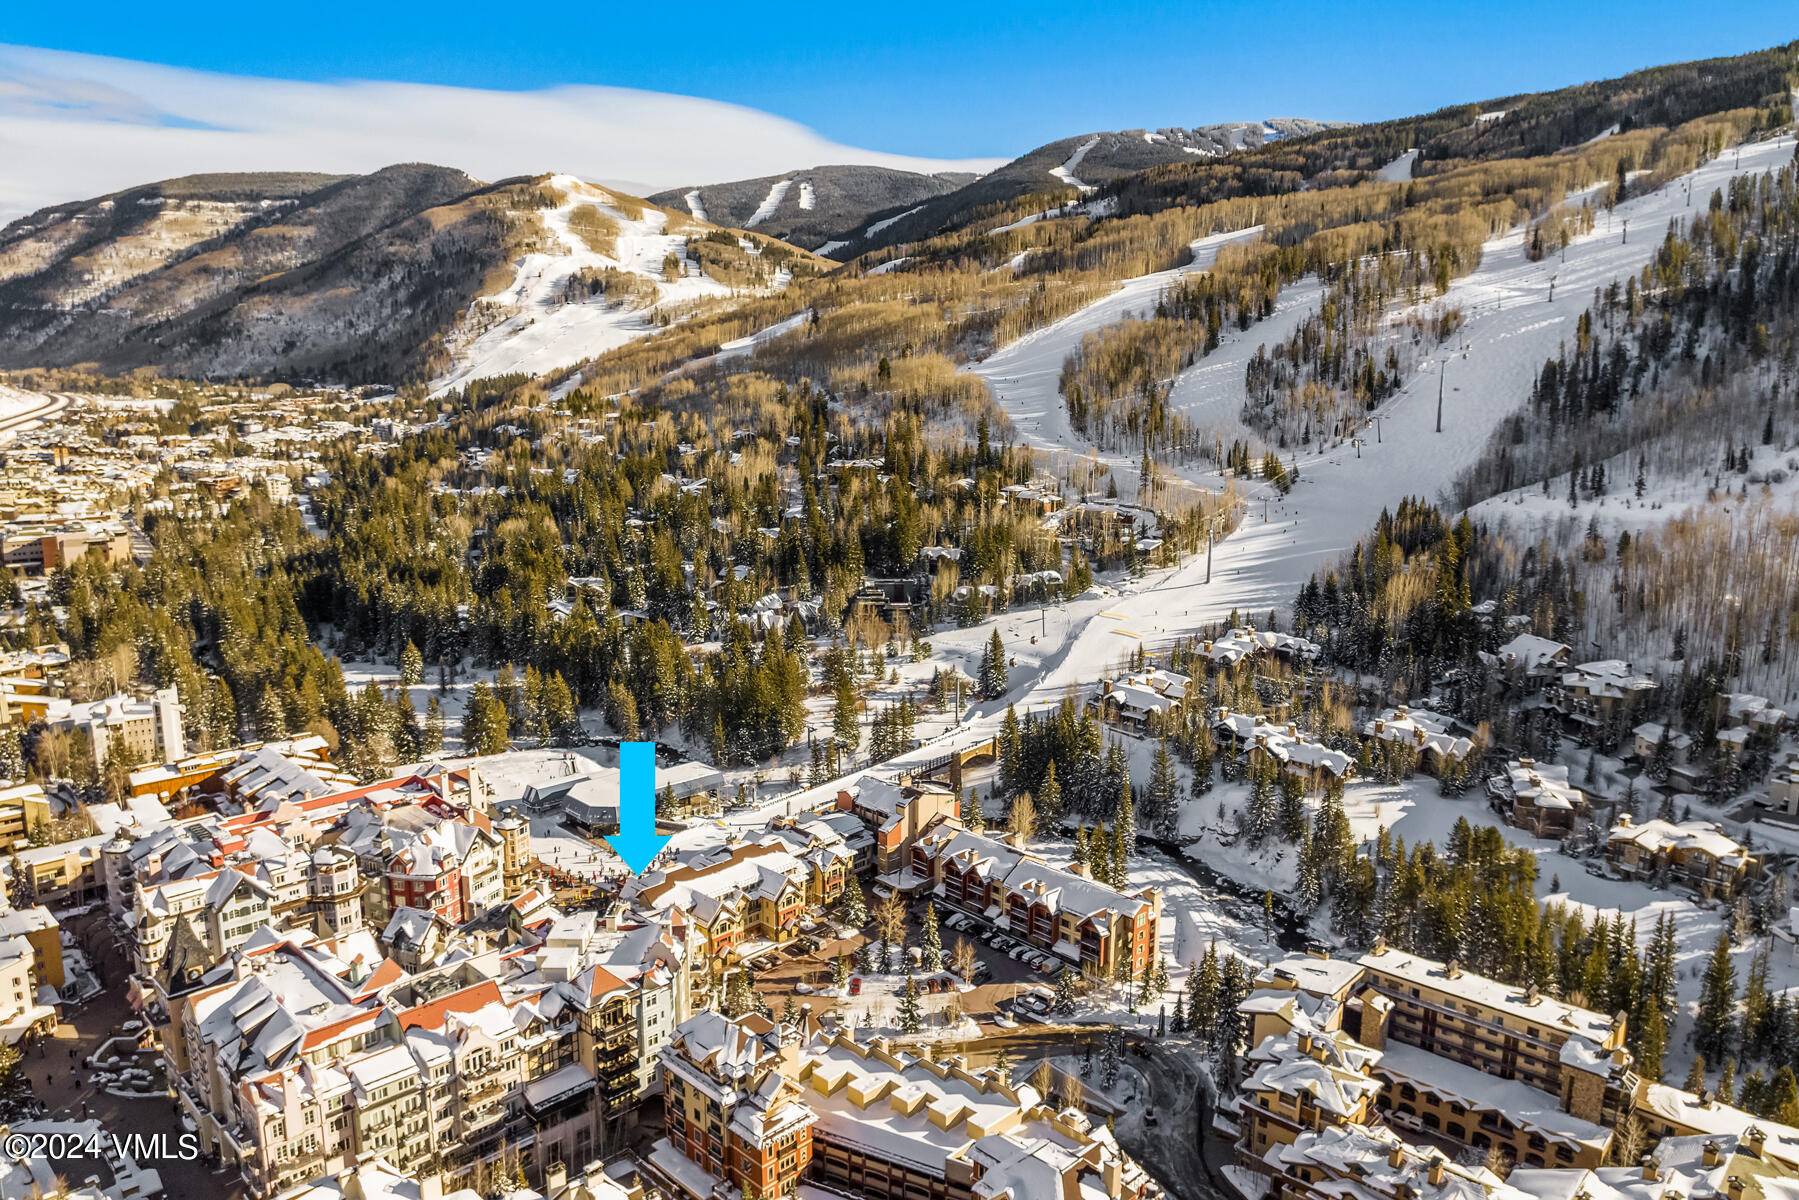 One of the rare authentic ski in ski out homes in Vail, this front row property stands merely around 150 feet from the Lionshead Gondola and Chair 8 ski lift.